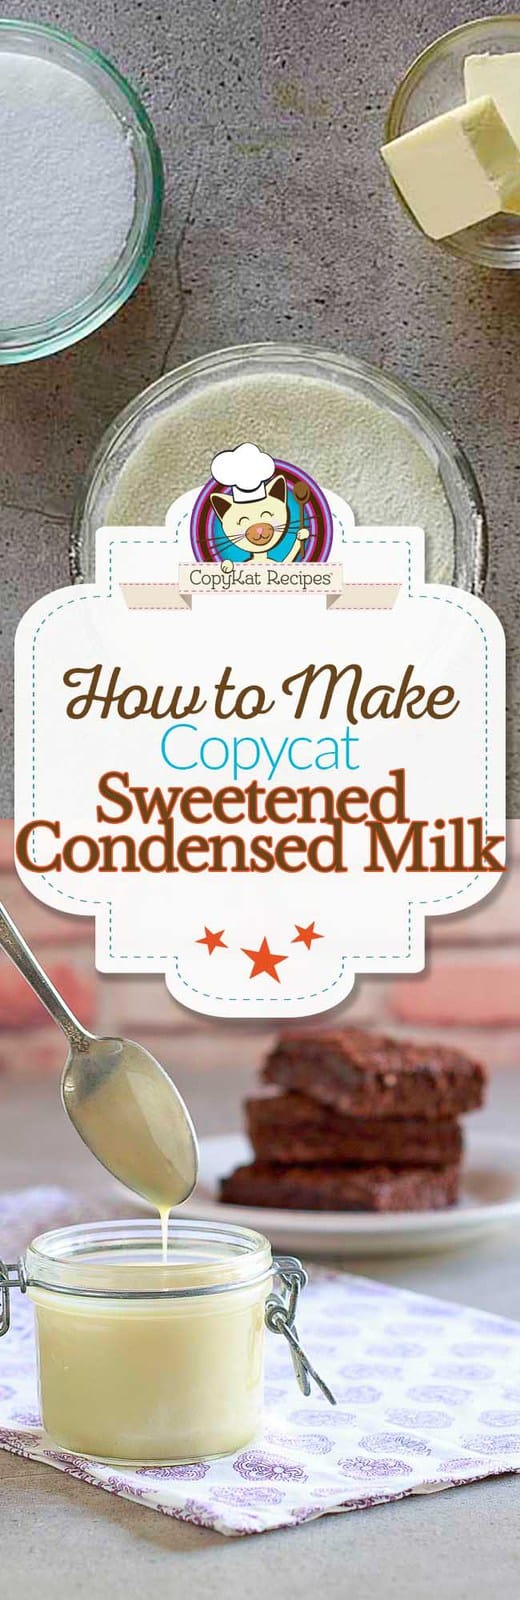 Save money when you make homemade sweetened condensed milk at home. 